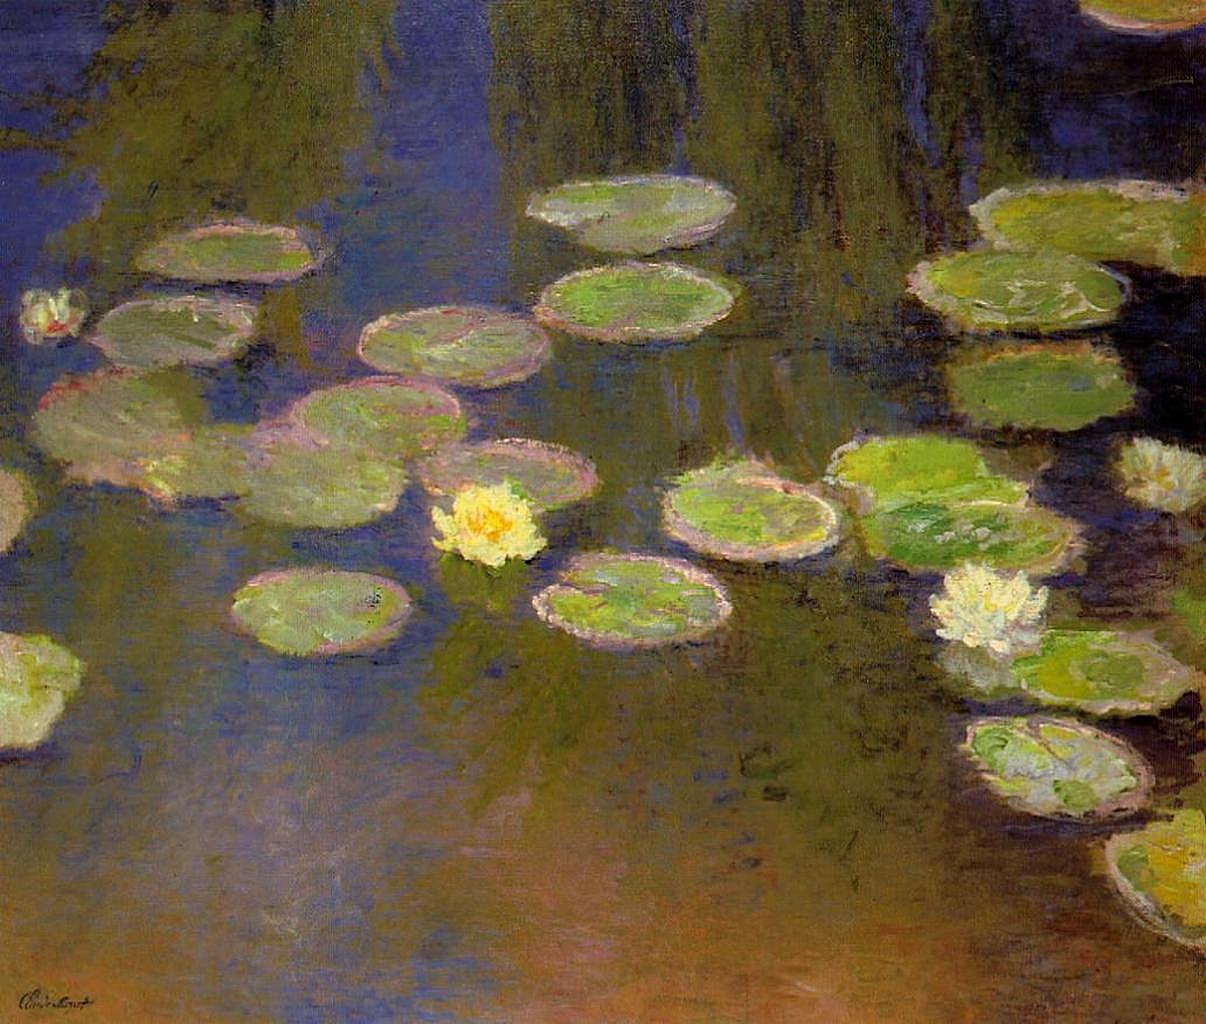 How To Read Paintings: Monet’s Water Lilies | by Christopher P Jones | Medium